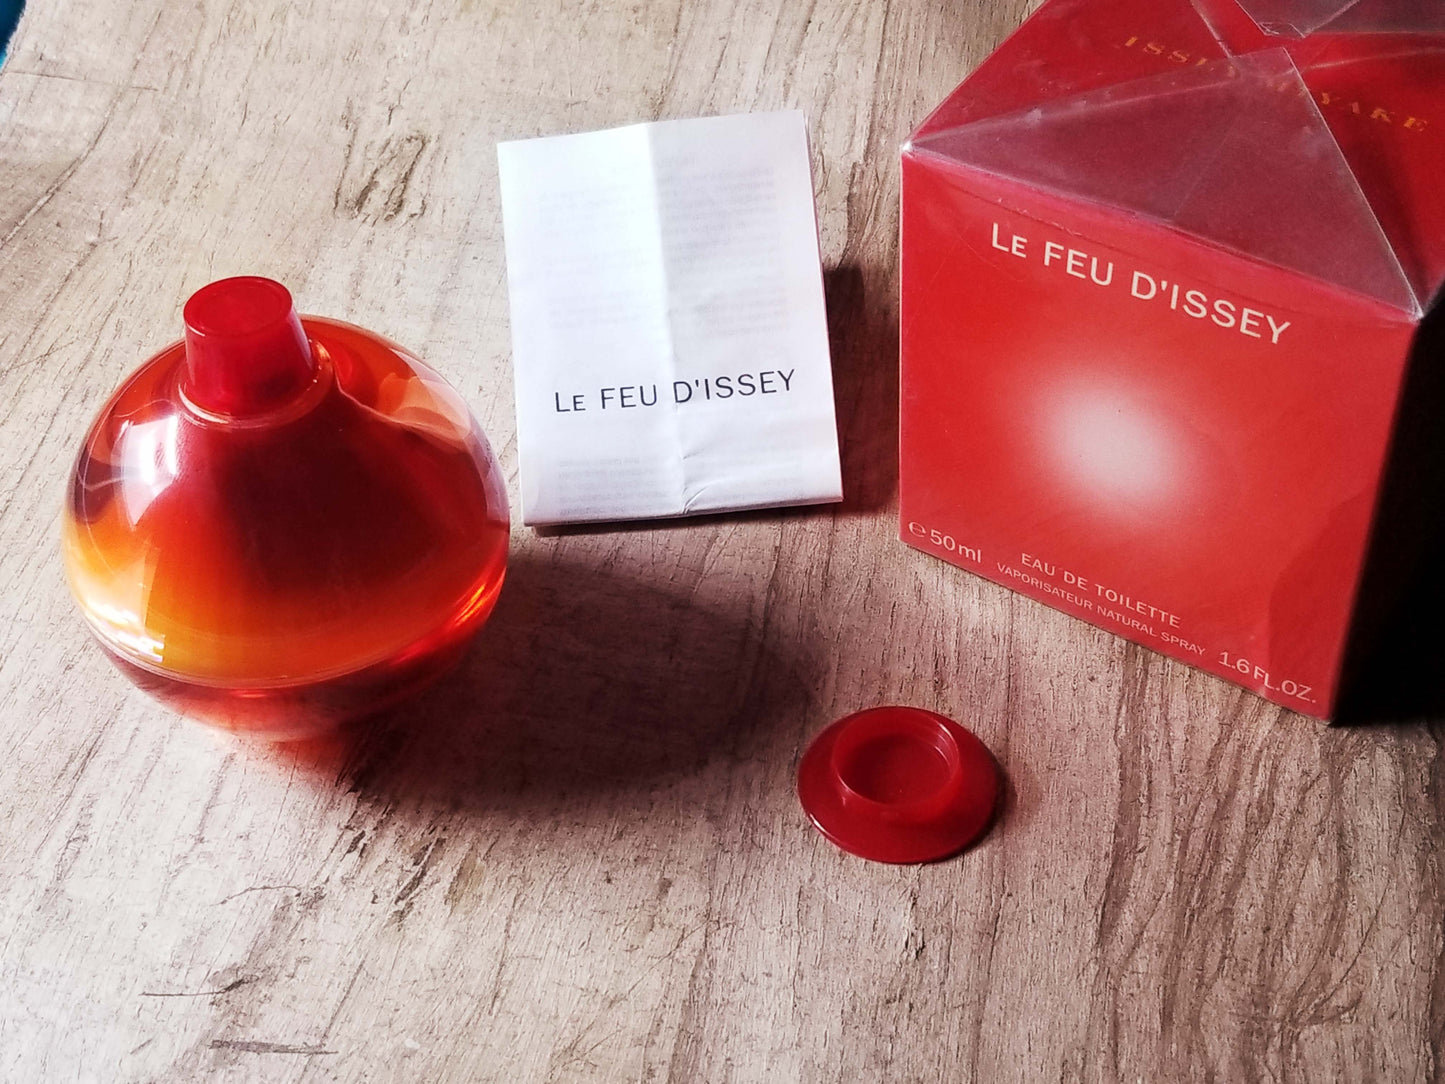 Le Feu d'Issey By Issey Miyake For Women EDT Spray 75 ml 2.5 oz Or 50 ml 1.7 oz, Vintage